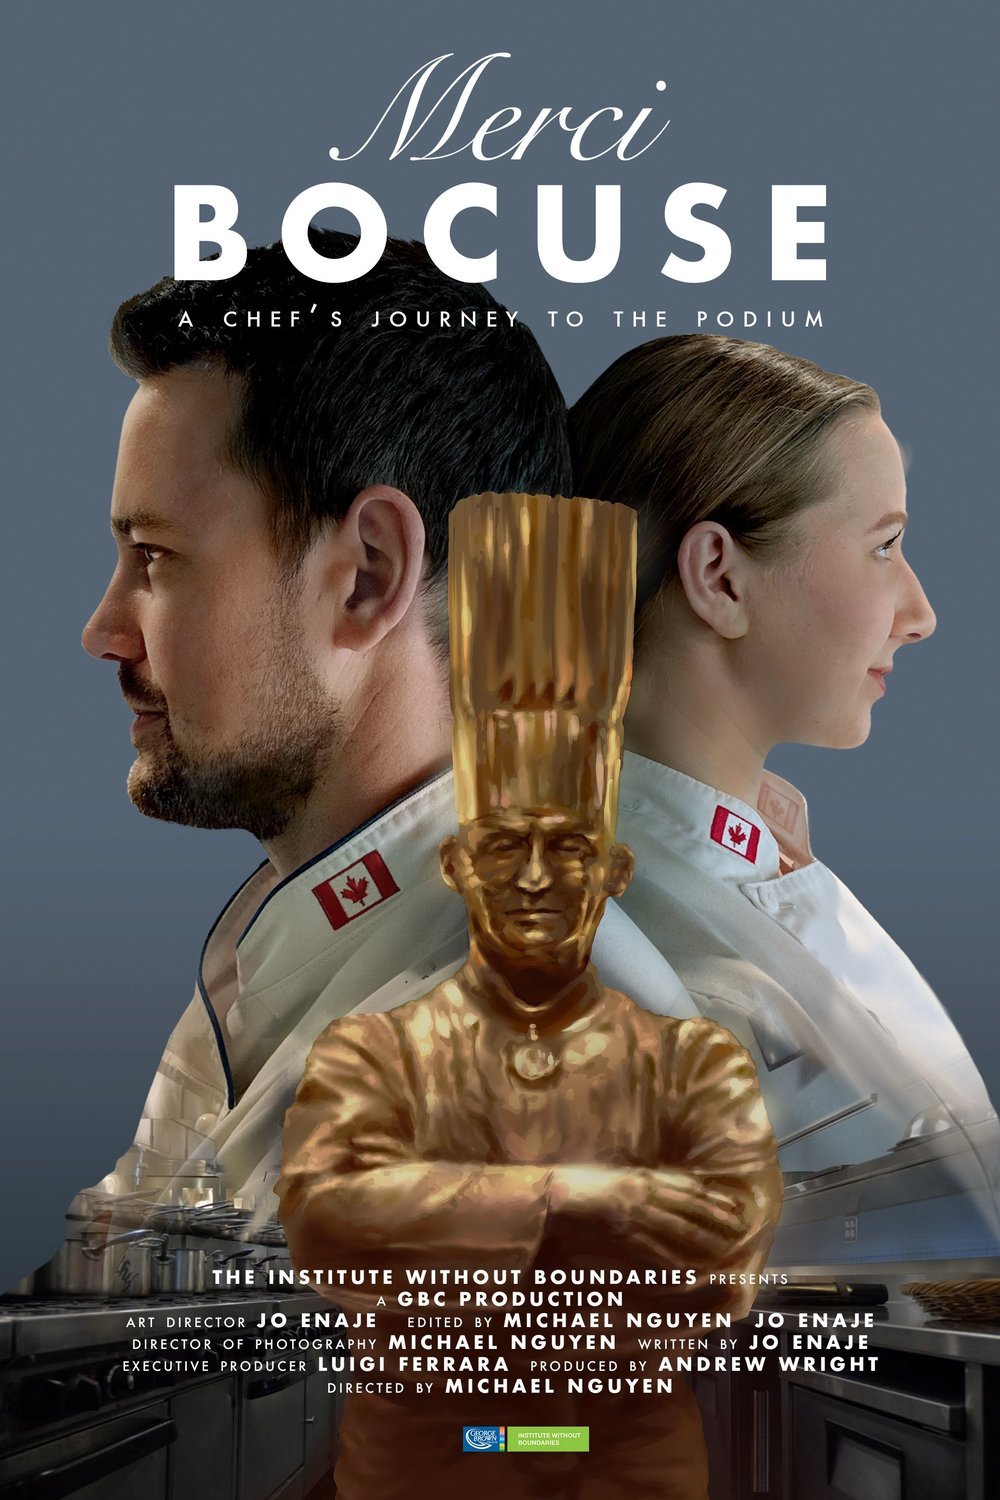 Poster of the movie Merci Bocuse